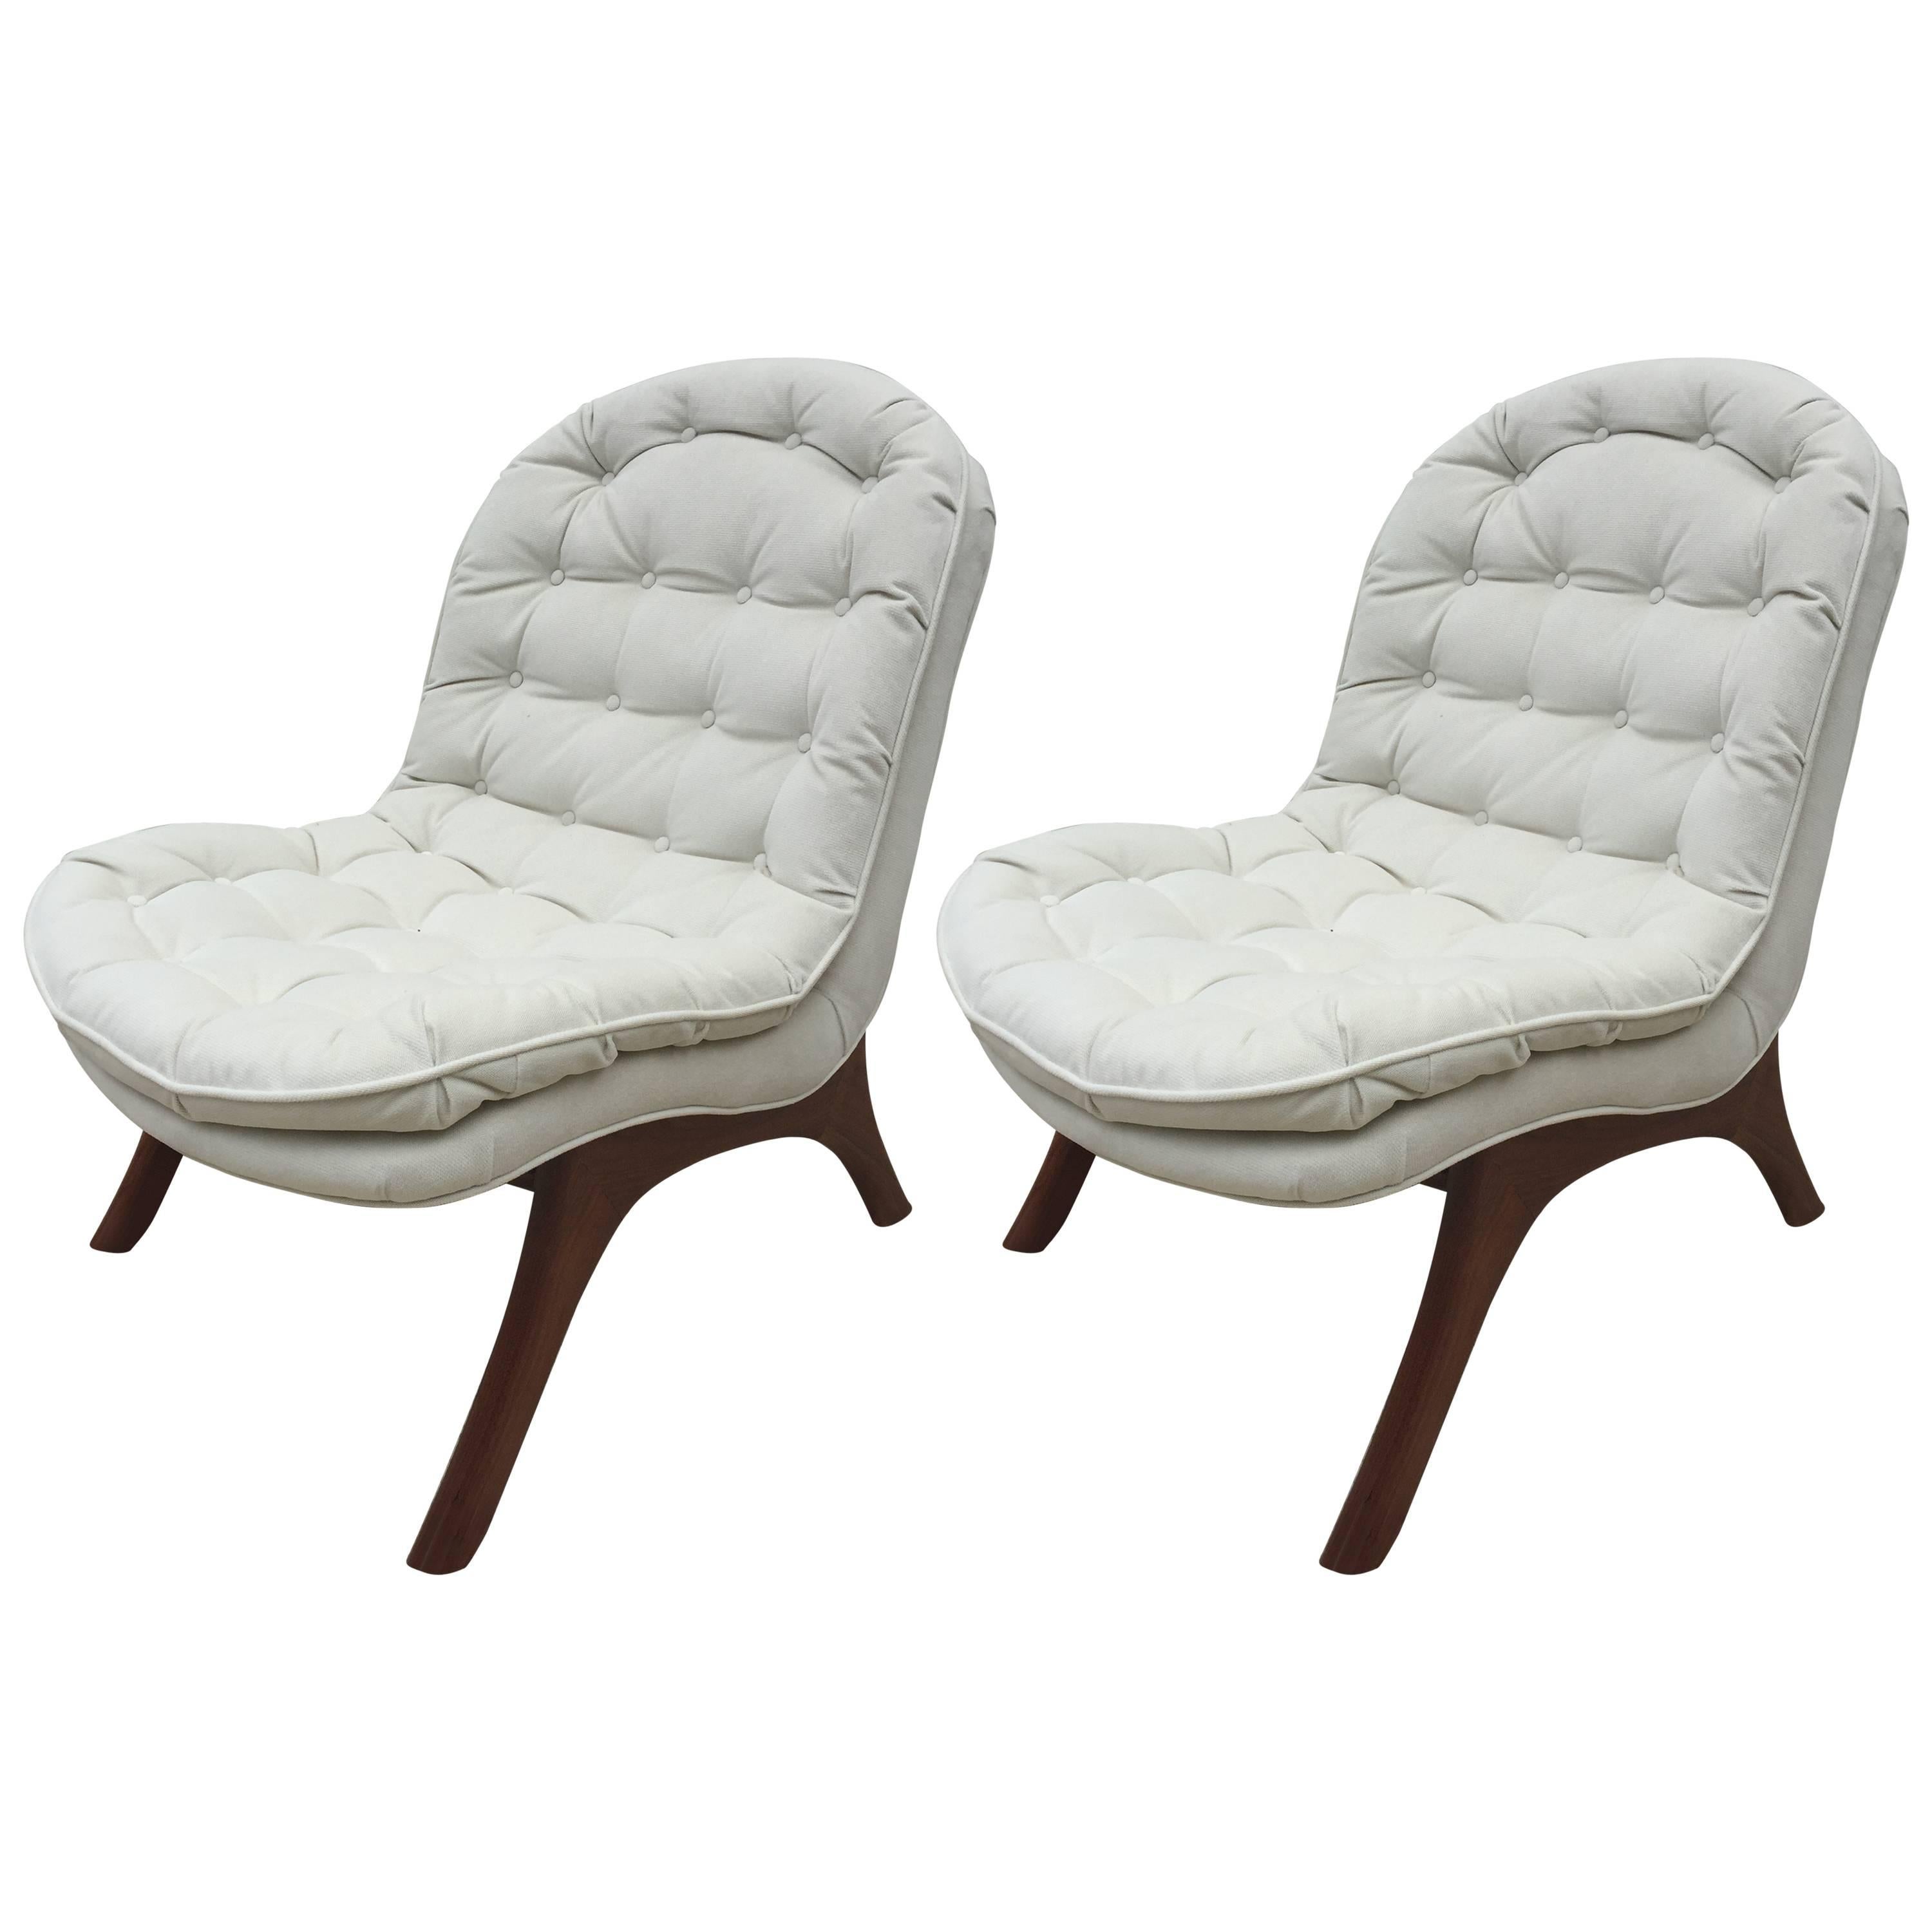 Pair of Club Chairs and Slipper Chairs in the style of Adrian Pearsall 